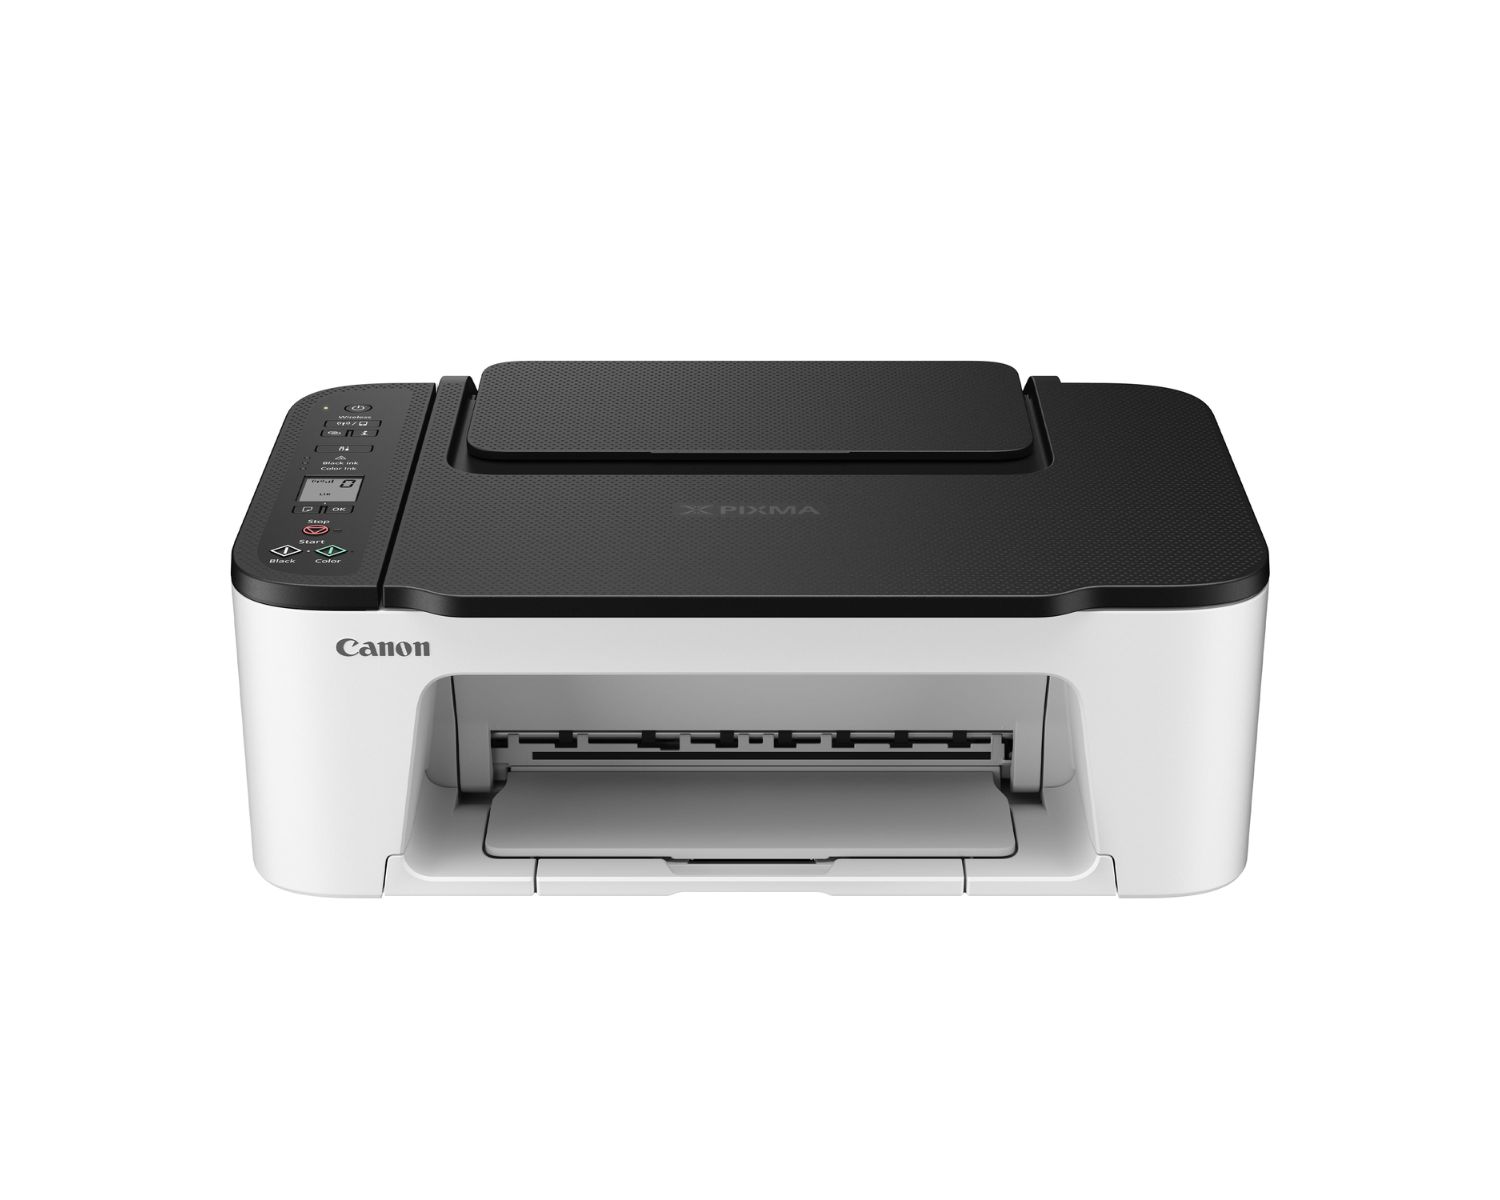 How To Connect Canon Ts3522 Printer To Computer